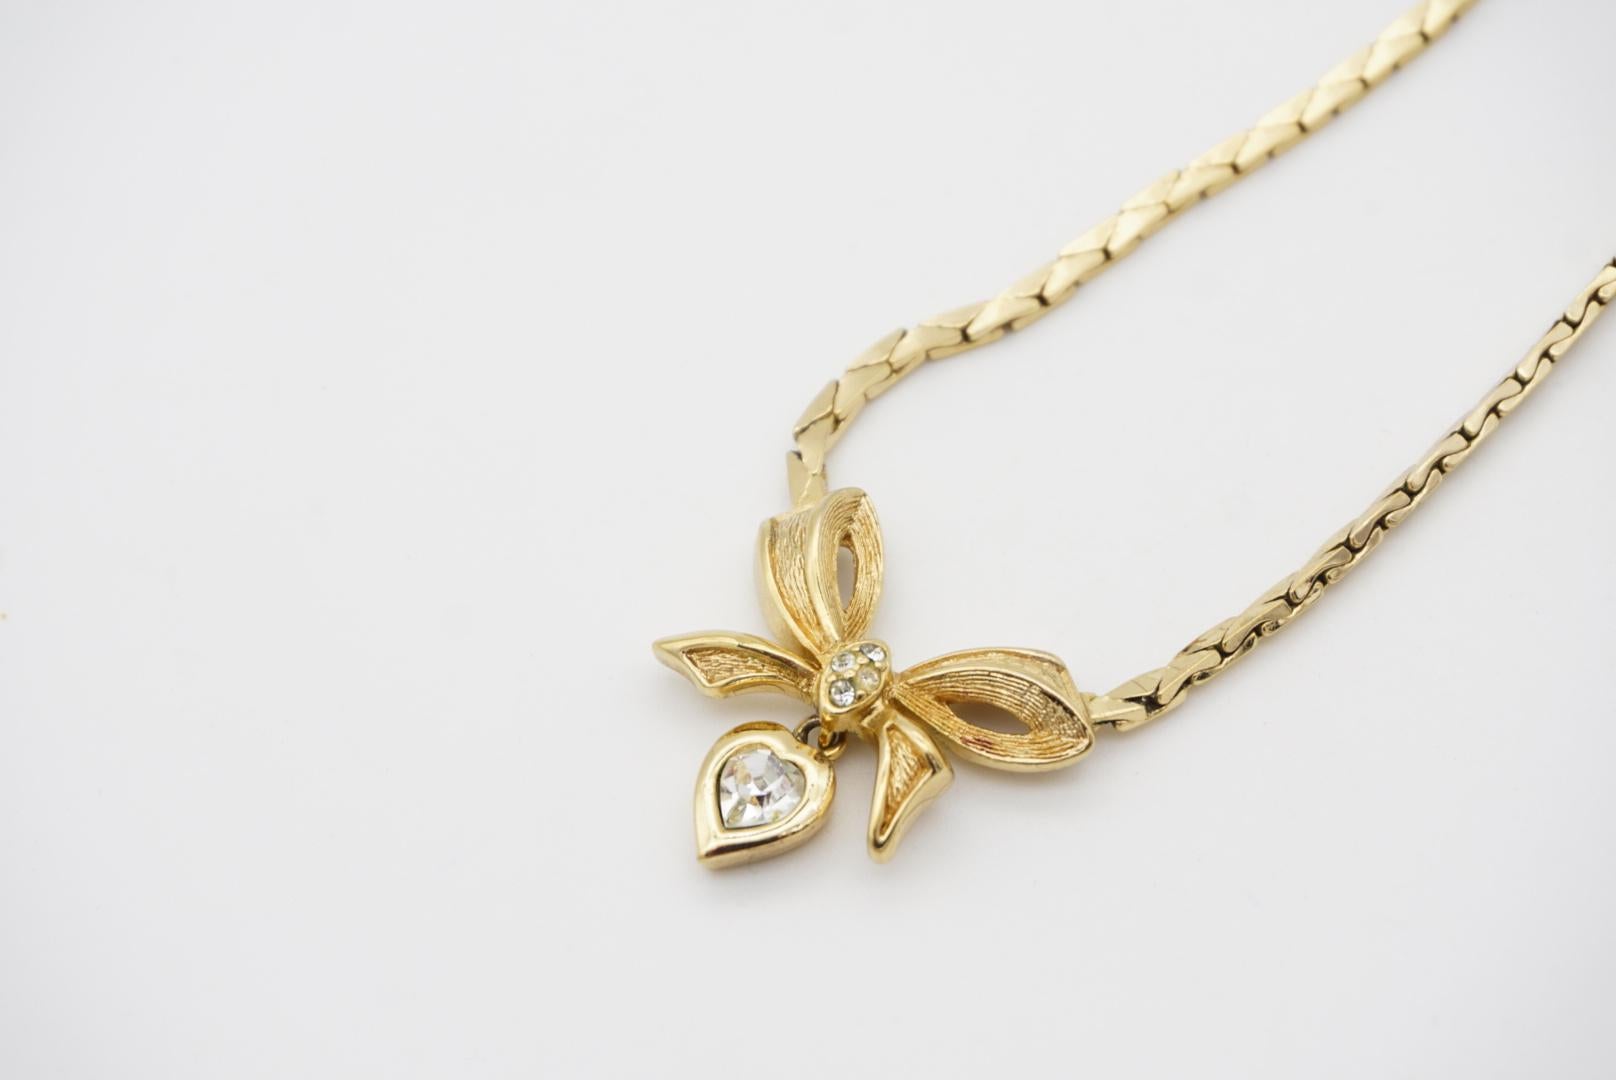 Christian Dior Vintage 1970s Knot Bow Crystals Heart Gold Drop Pendant Necklace In Excellent Condition For Sale In Wokingham, England